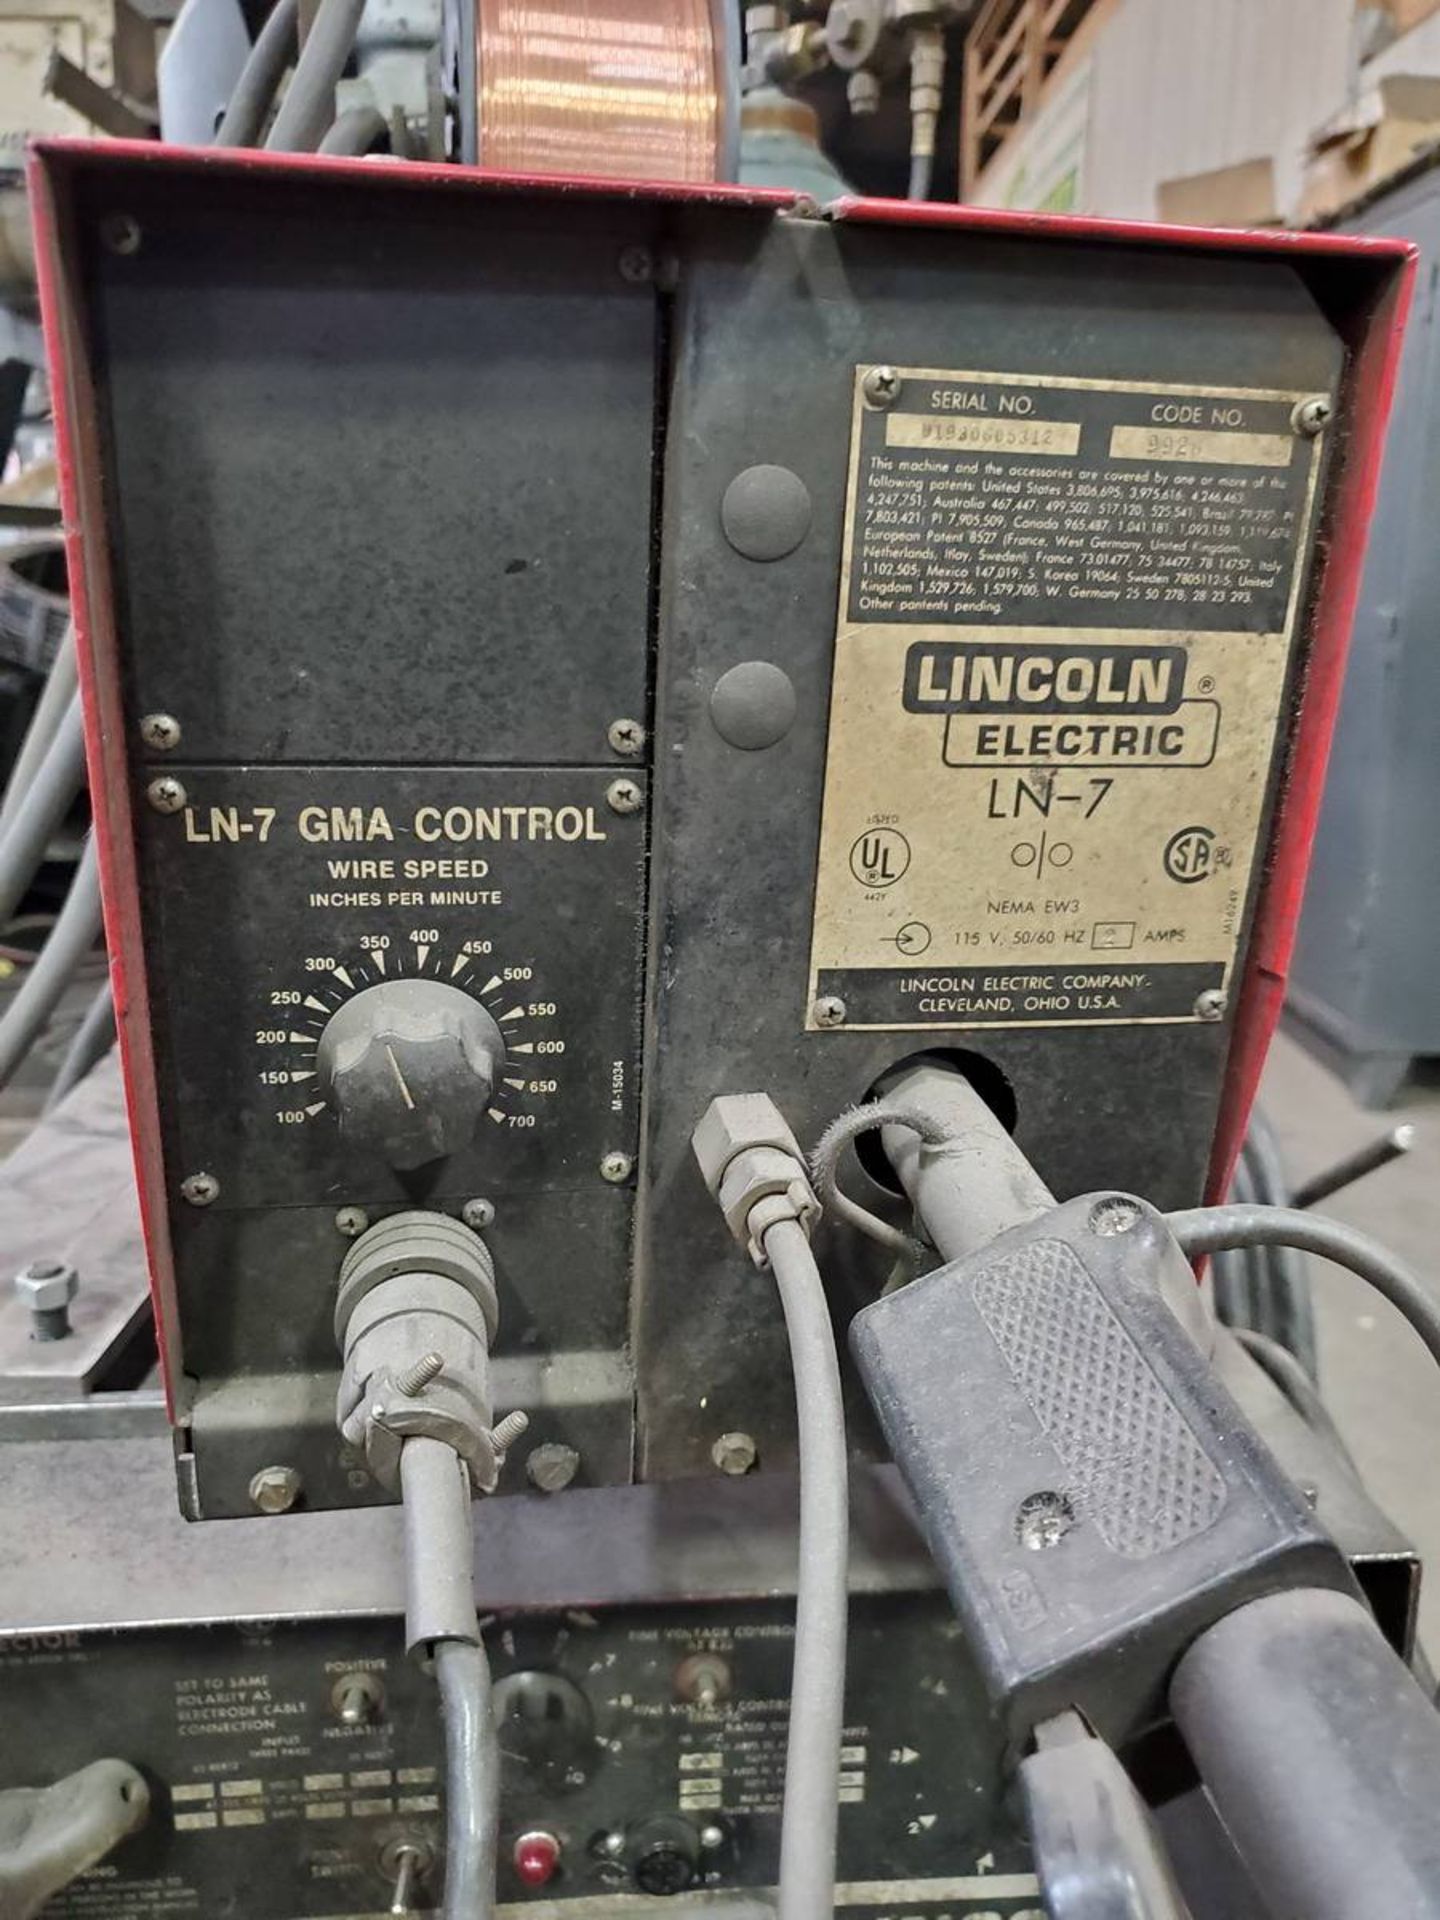 Lincoln R3S-325 Portable Welder - Image 4 of 5